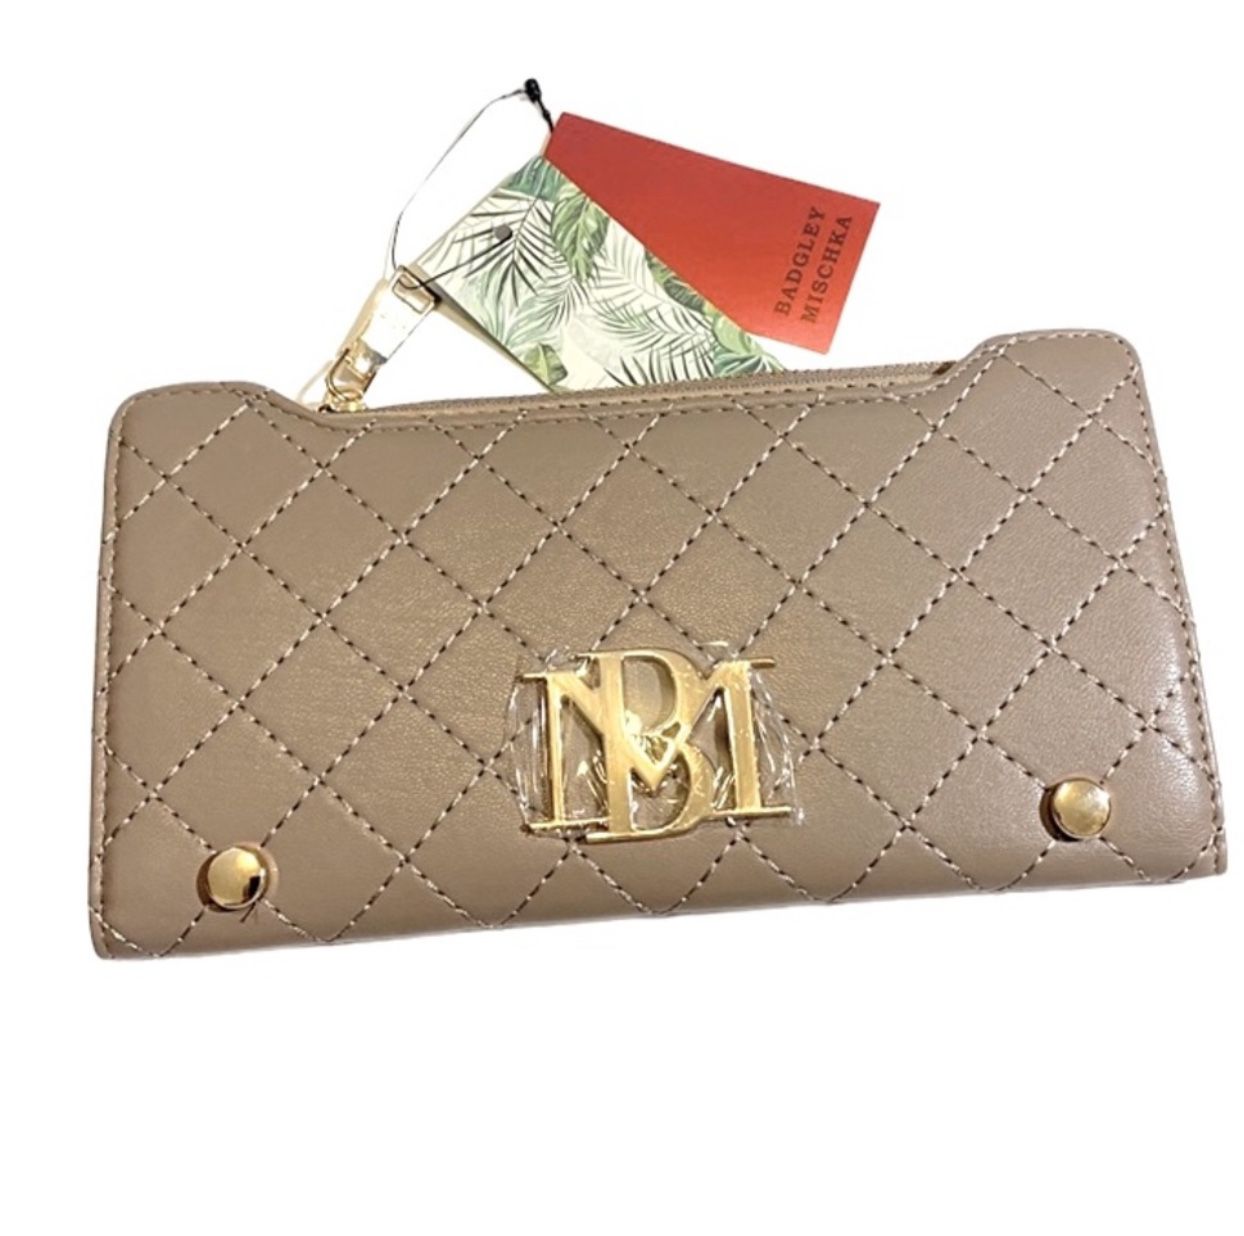 Badgley Mischka Wallets New With Tags!